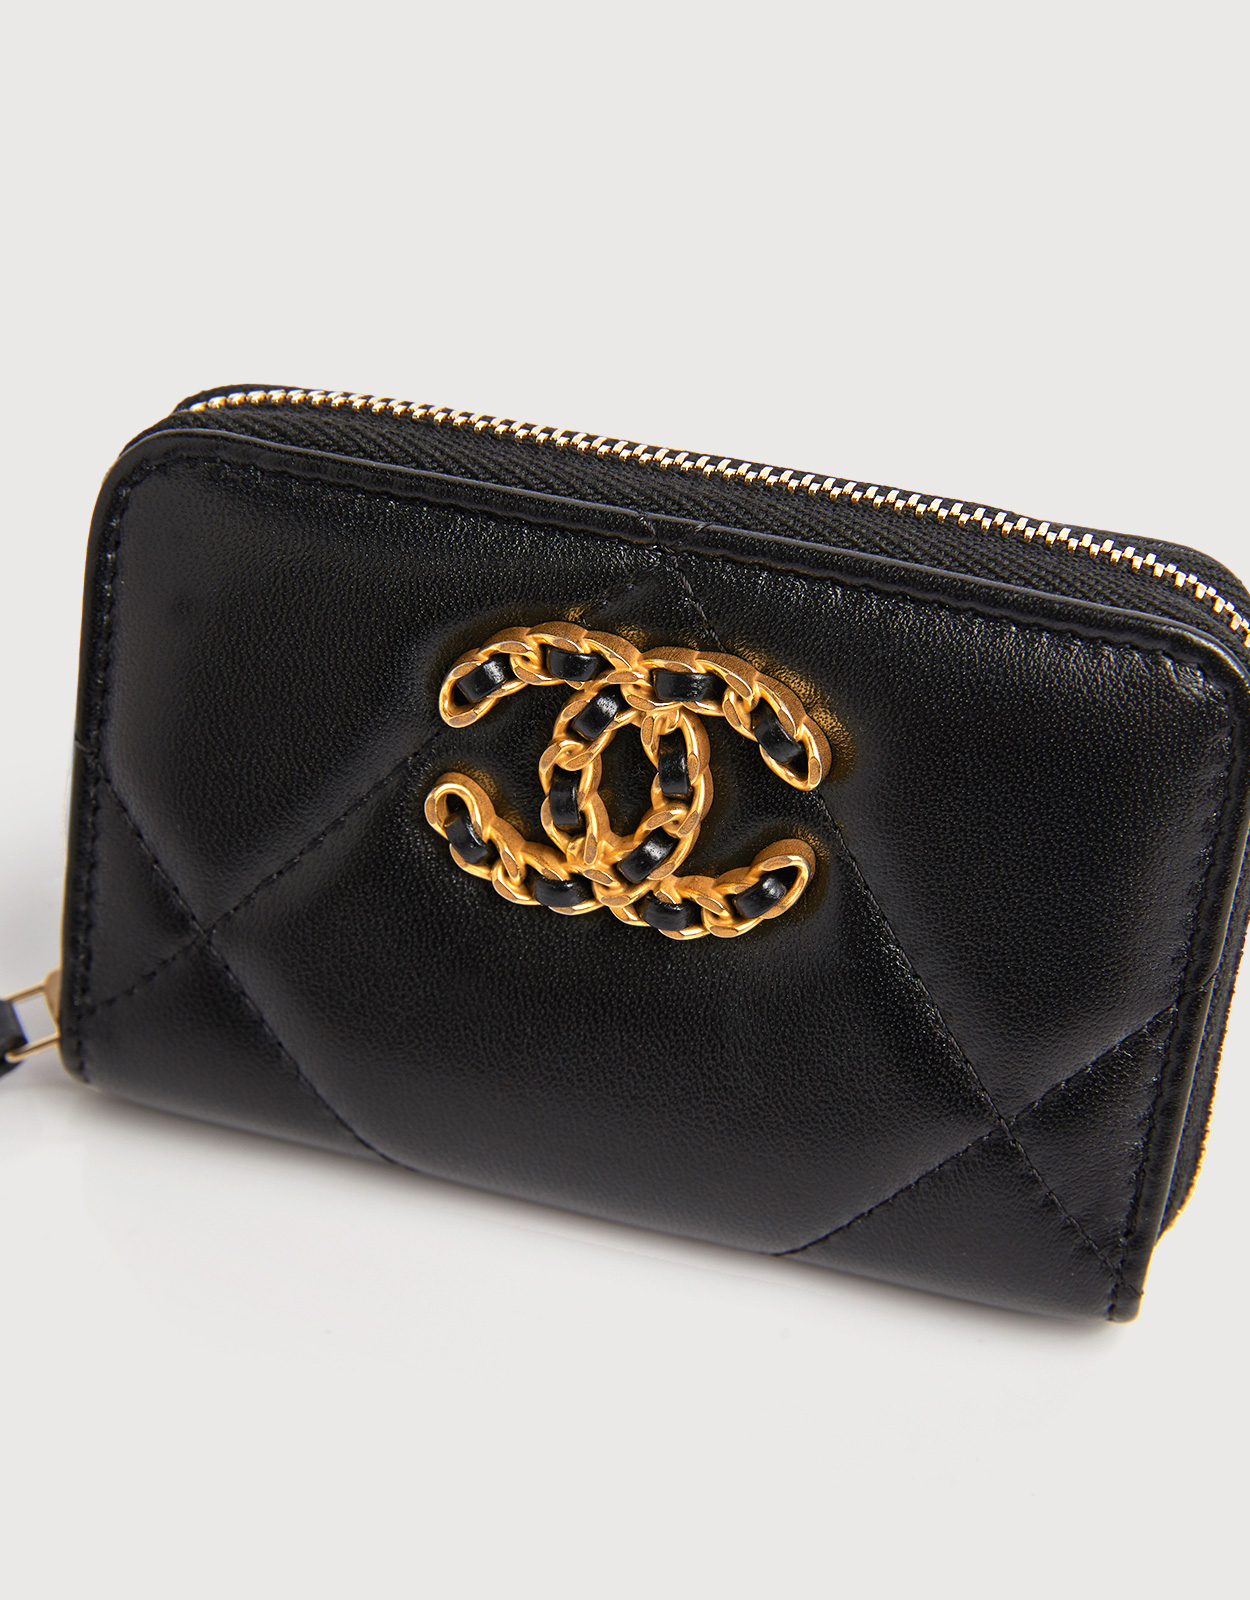 Chanel Chanel 19 Zipped Coin Purse